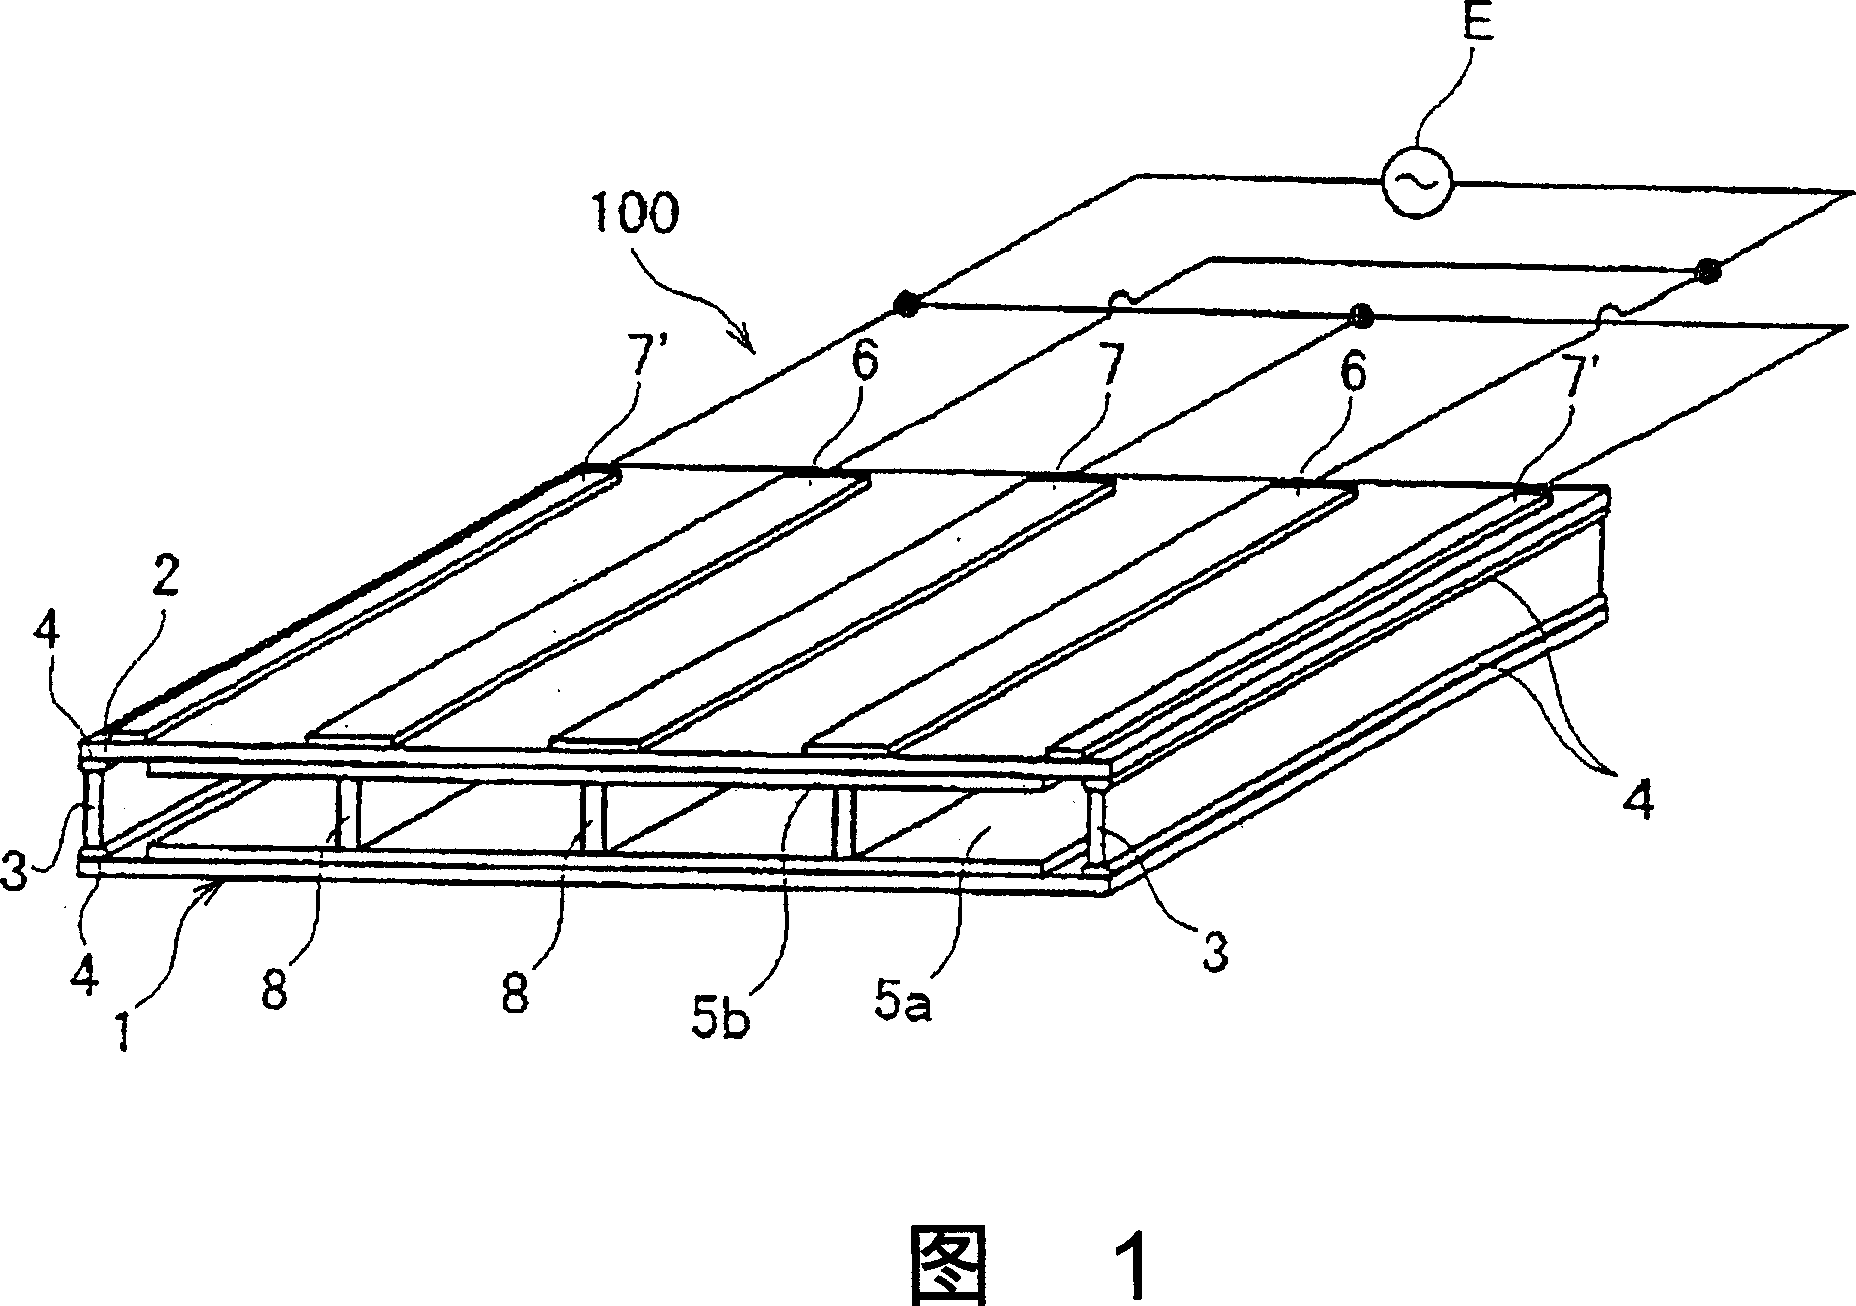 Flat type discharge lamp and lighting device